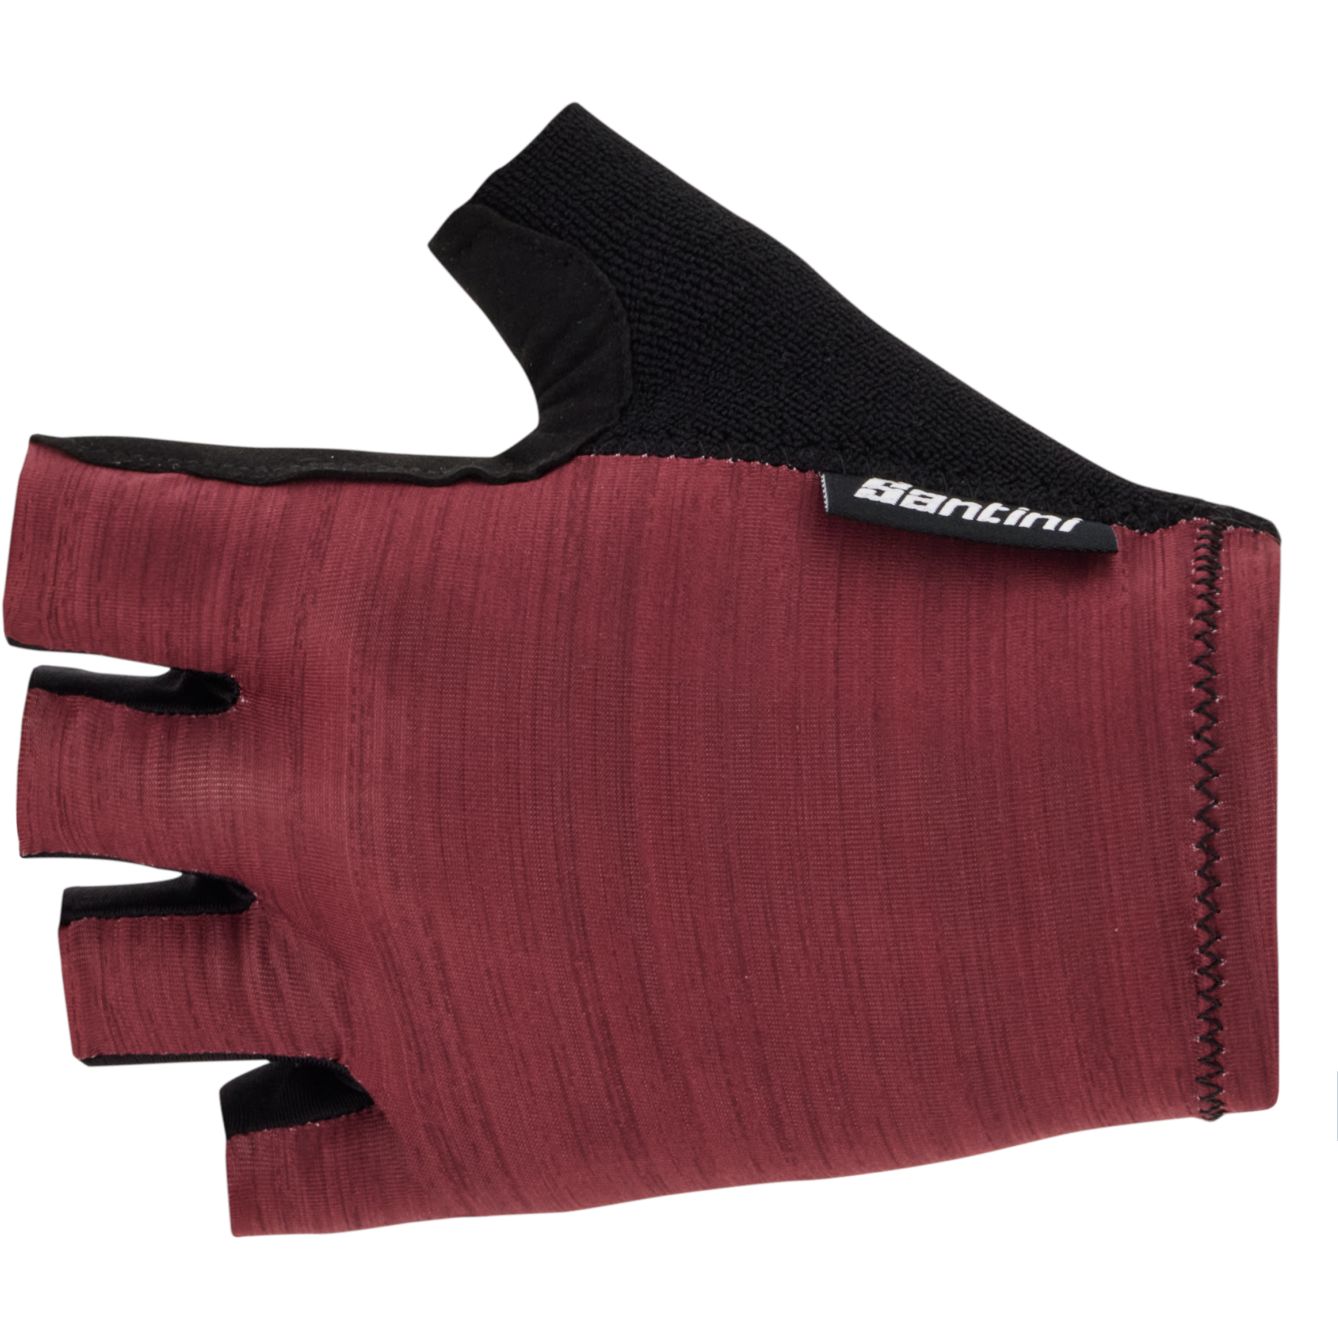 Picture of Santini Cubo Cycling Gloves 1S367CLCUBO - burgundy BU